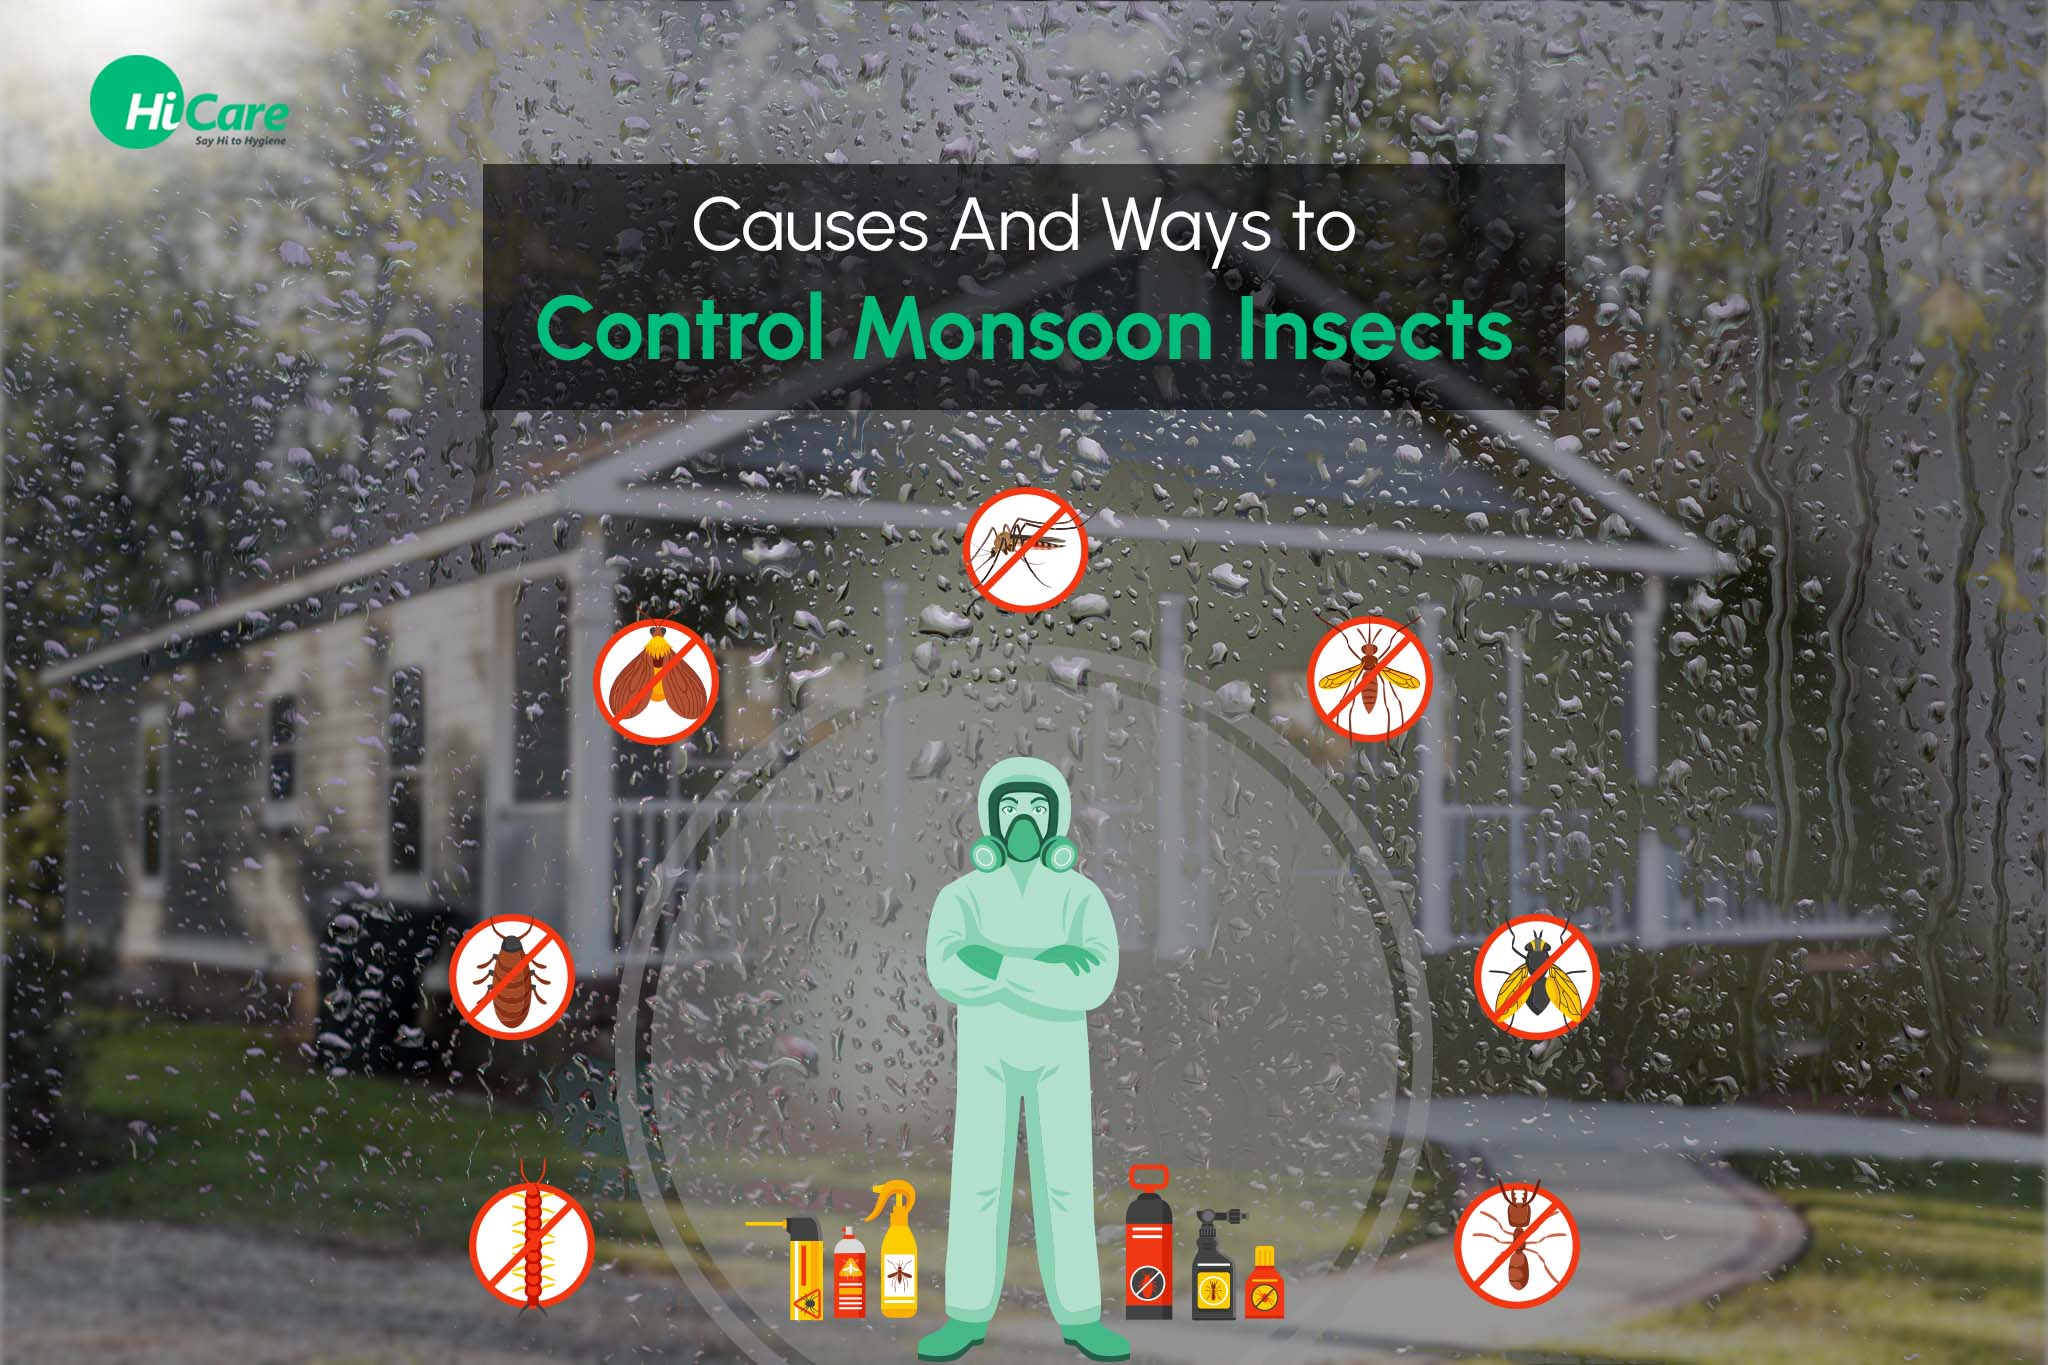 Causes And Ways to Control Monsoon Insects